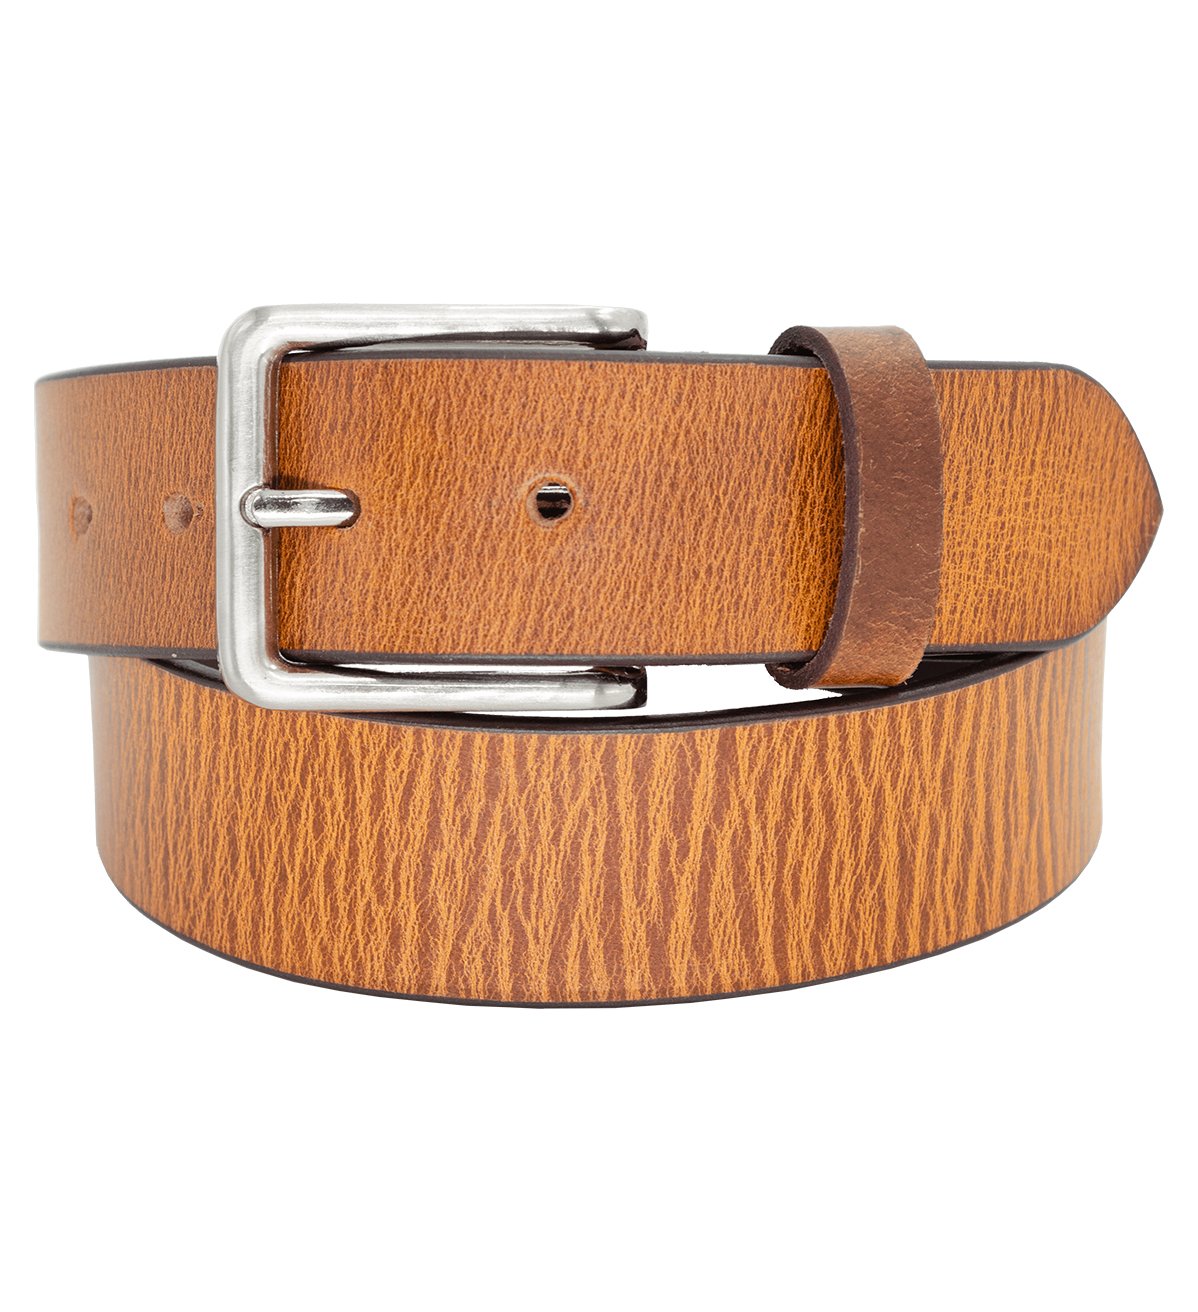 Men's Double Tone Genuine Leather Belt with Heavy Silver Buckle - #BT-1547